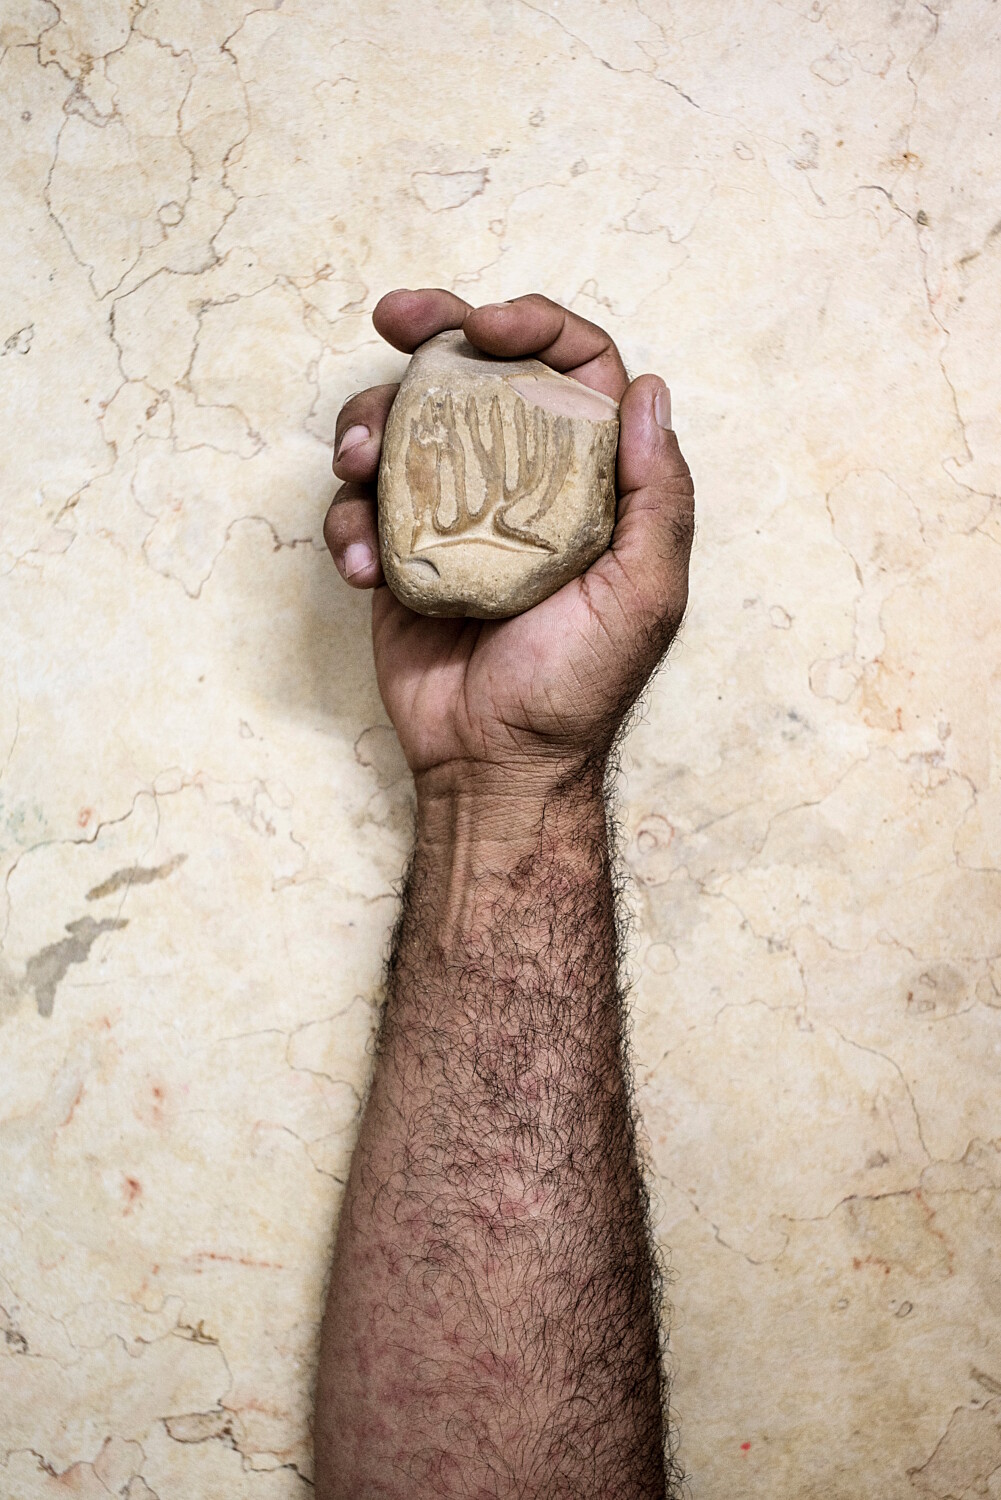 Nour al-Dein Zaki sees this stone as a modern miracle that appears to include Arabic script.